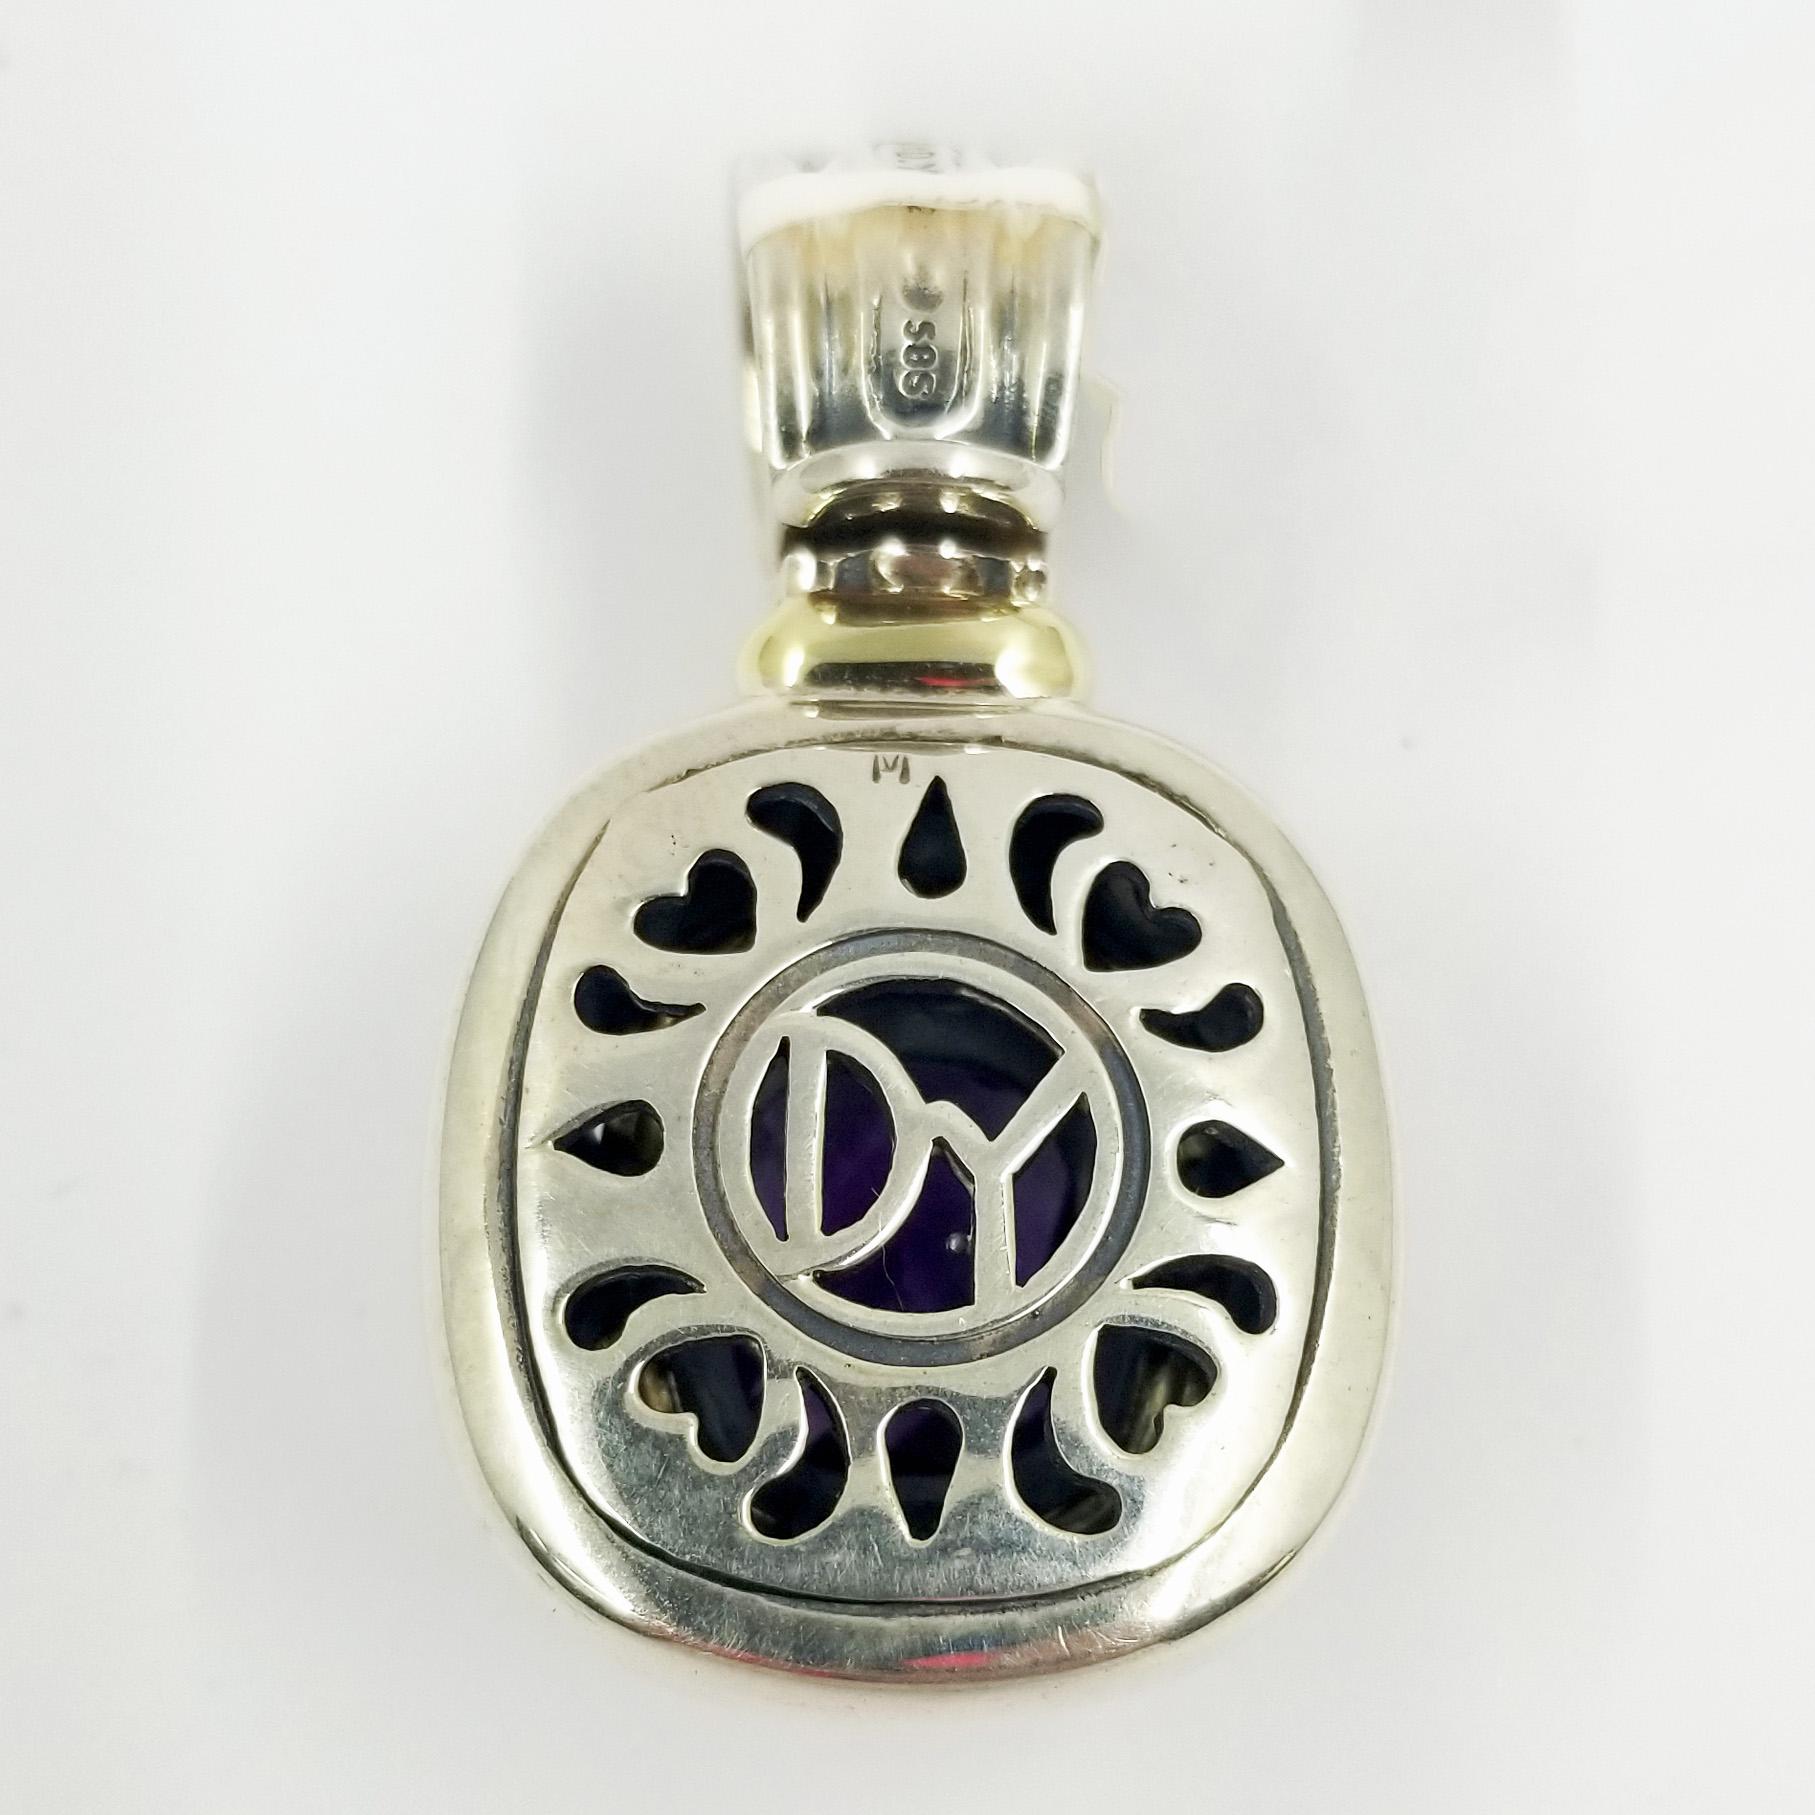 Amethyst Quartz Pendant from David Yurman set in 14 karat yellow gold and sterling silver. The enhancer features a bale that opens to locks onto various chains. The cushion-cut center stone is bezel set and measures approximately 10mm x 12mm.